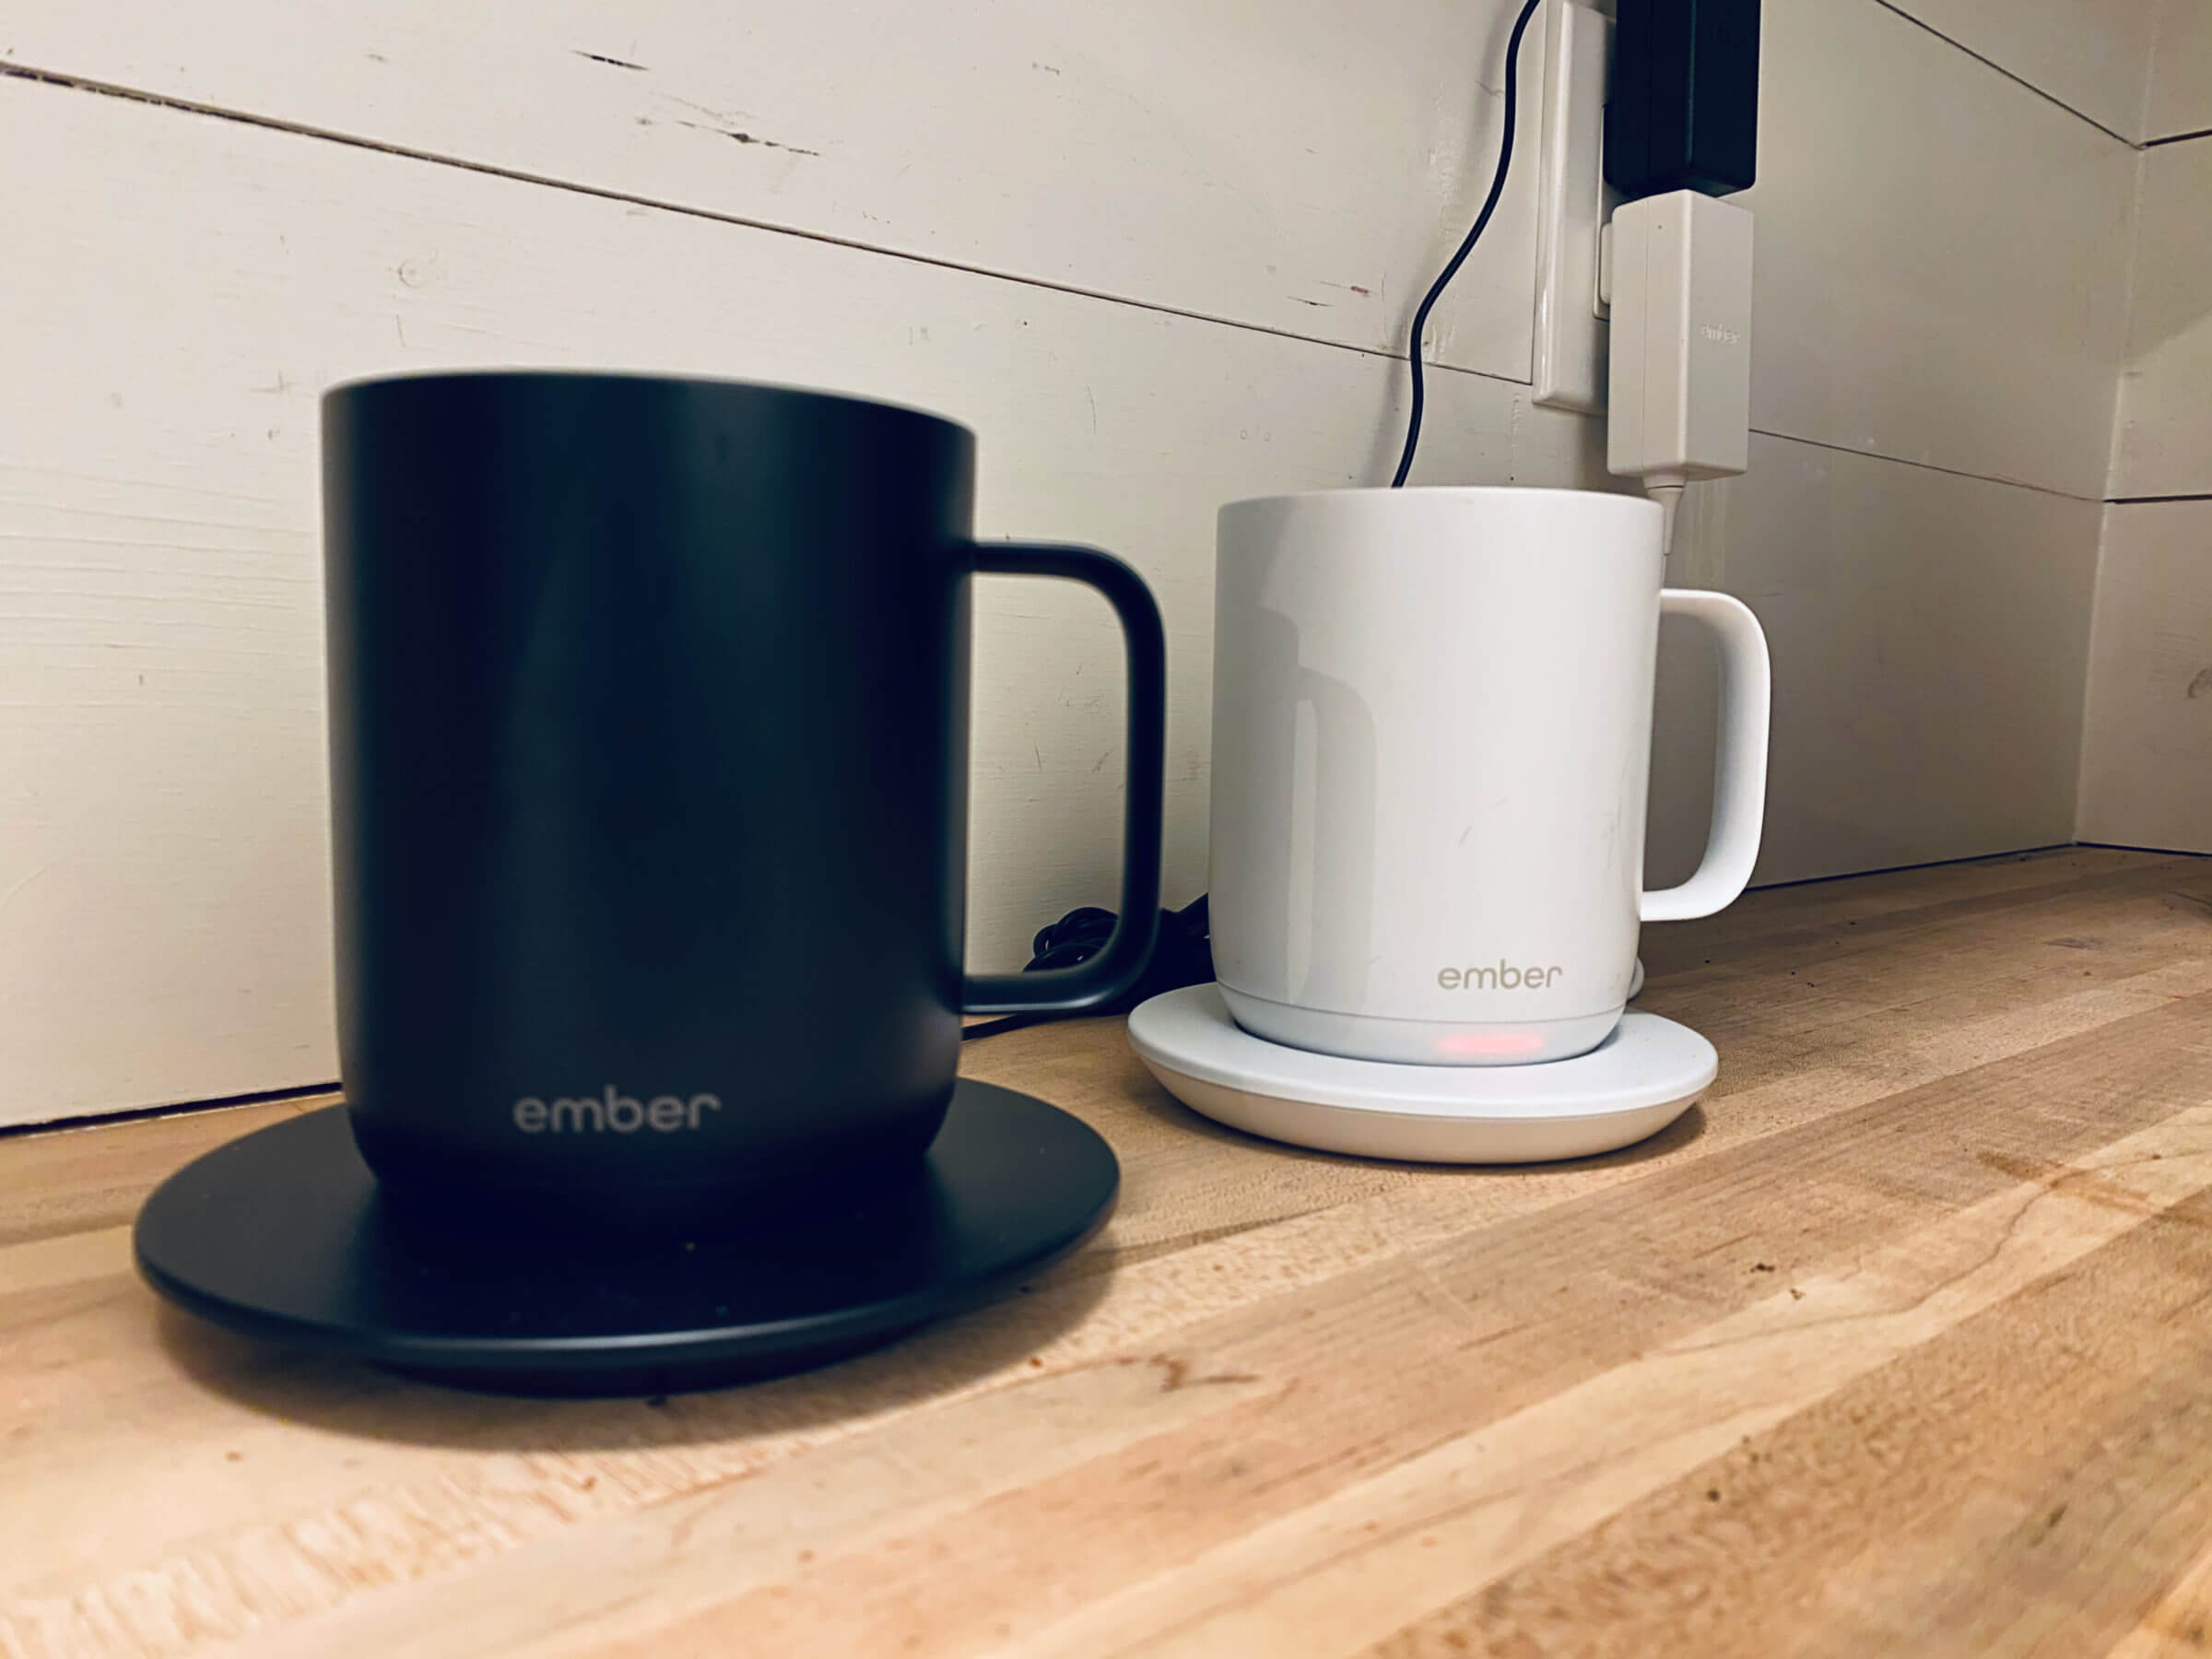 https://michaelkummer.com/wp-content/uploads/2020/10/We-charge-our-Ember-Mugs-in-the-pantry-overnight-close-up.jpeg